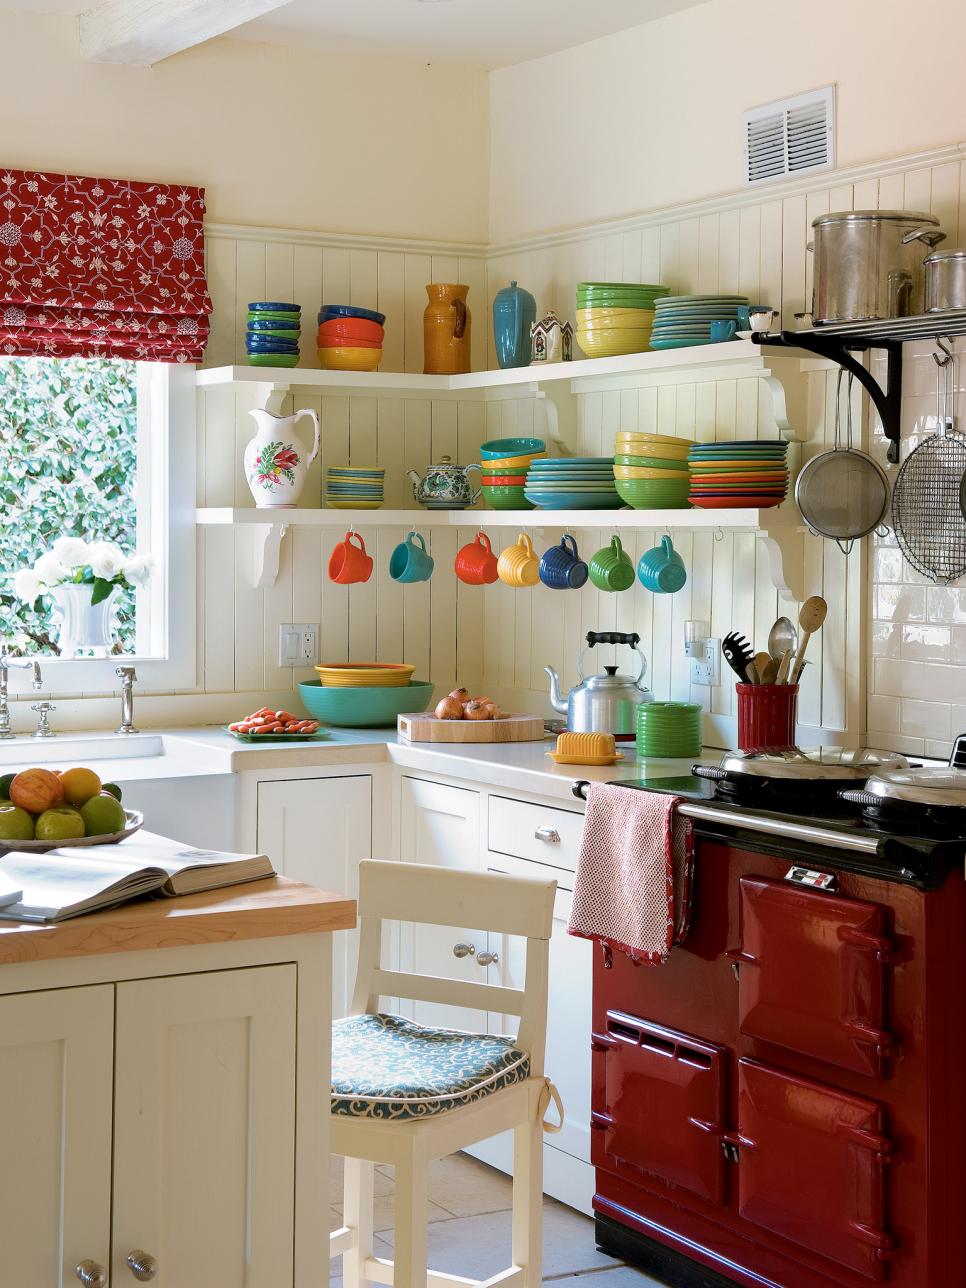 Small L-shaped Kitchen With Red & White Cabinets Dwellingdecor